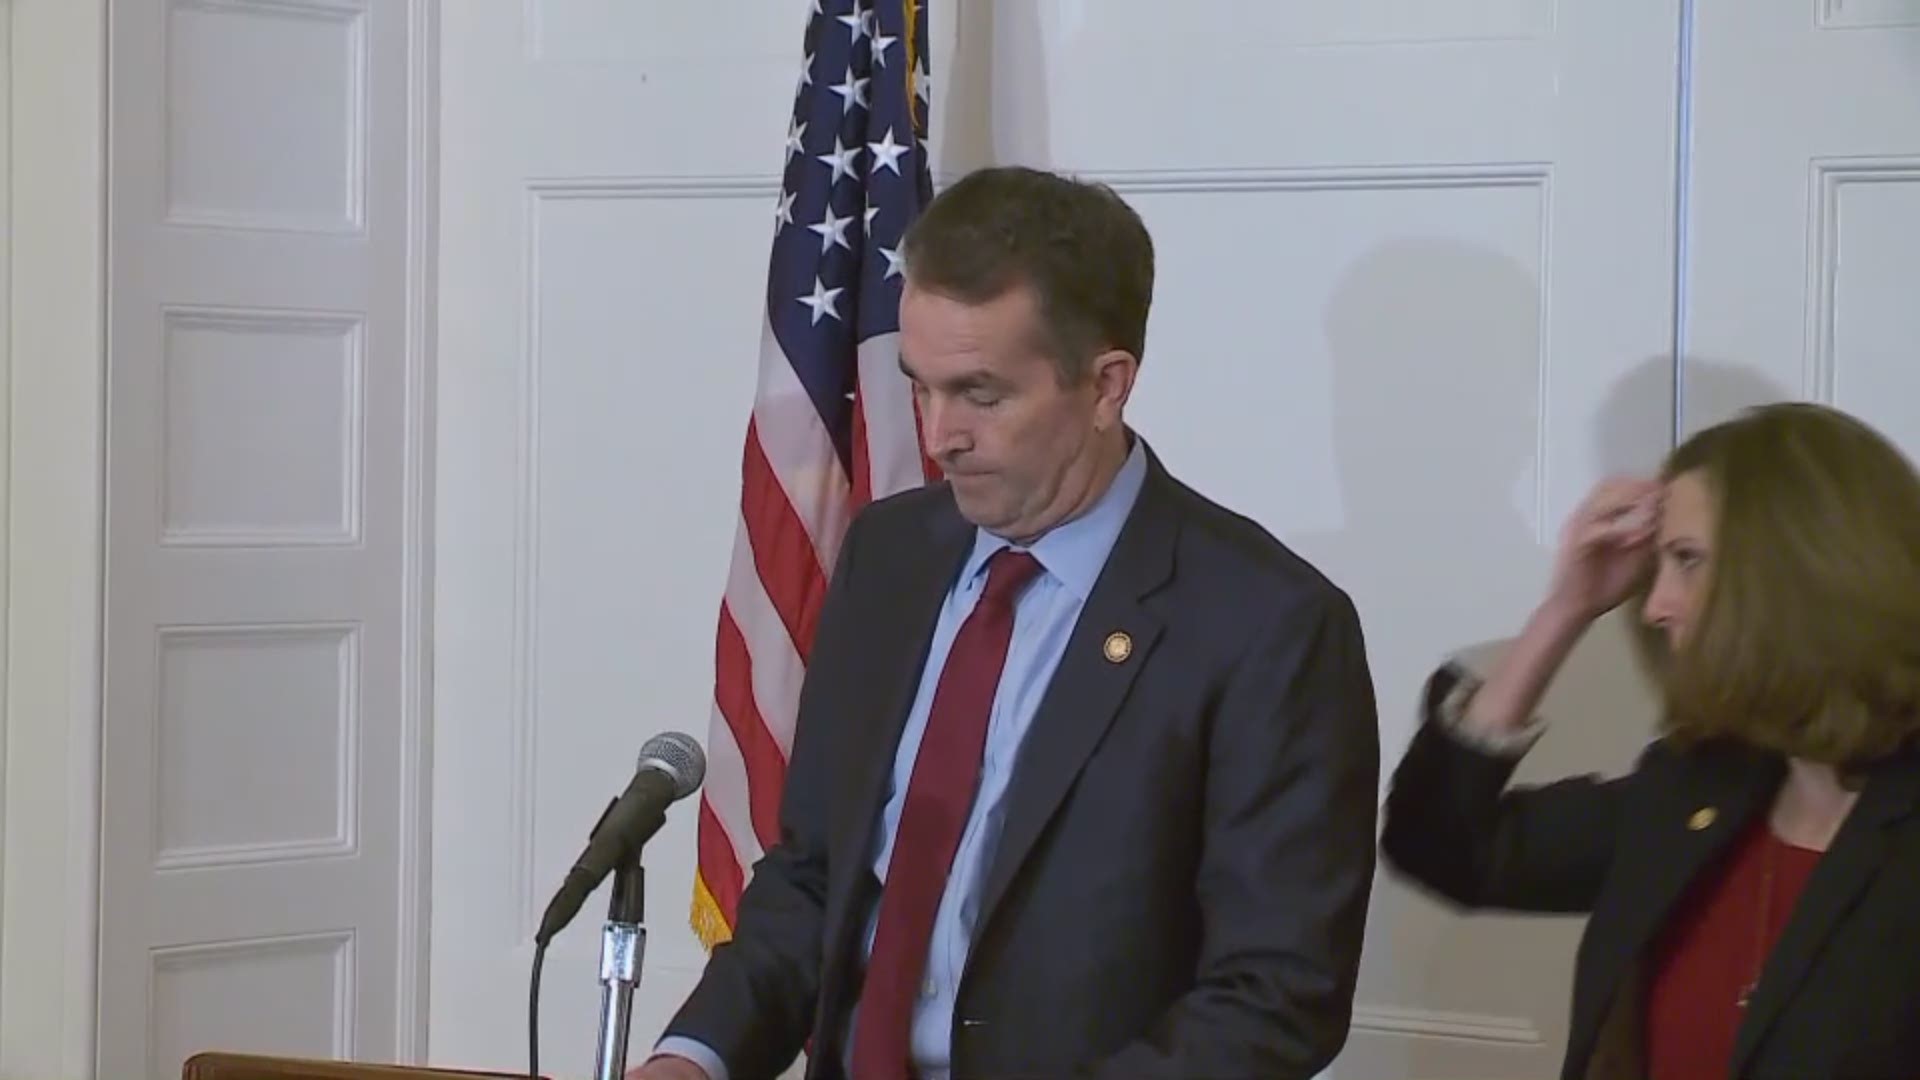 Virginia Gov. Ralph Northam reversed course in a news conference saying that he was not one of the people seen in a racist picture on his 1984 yearbook page.